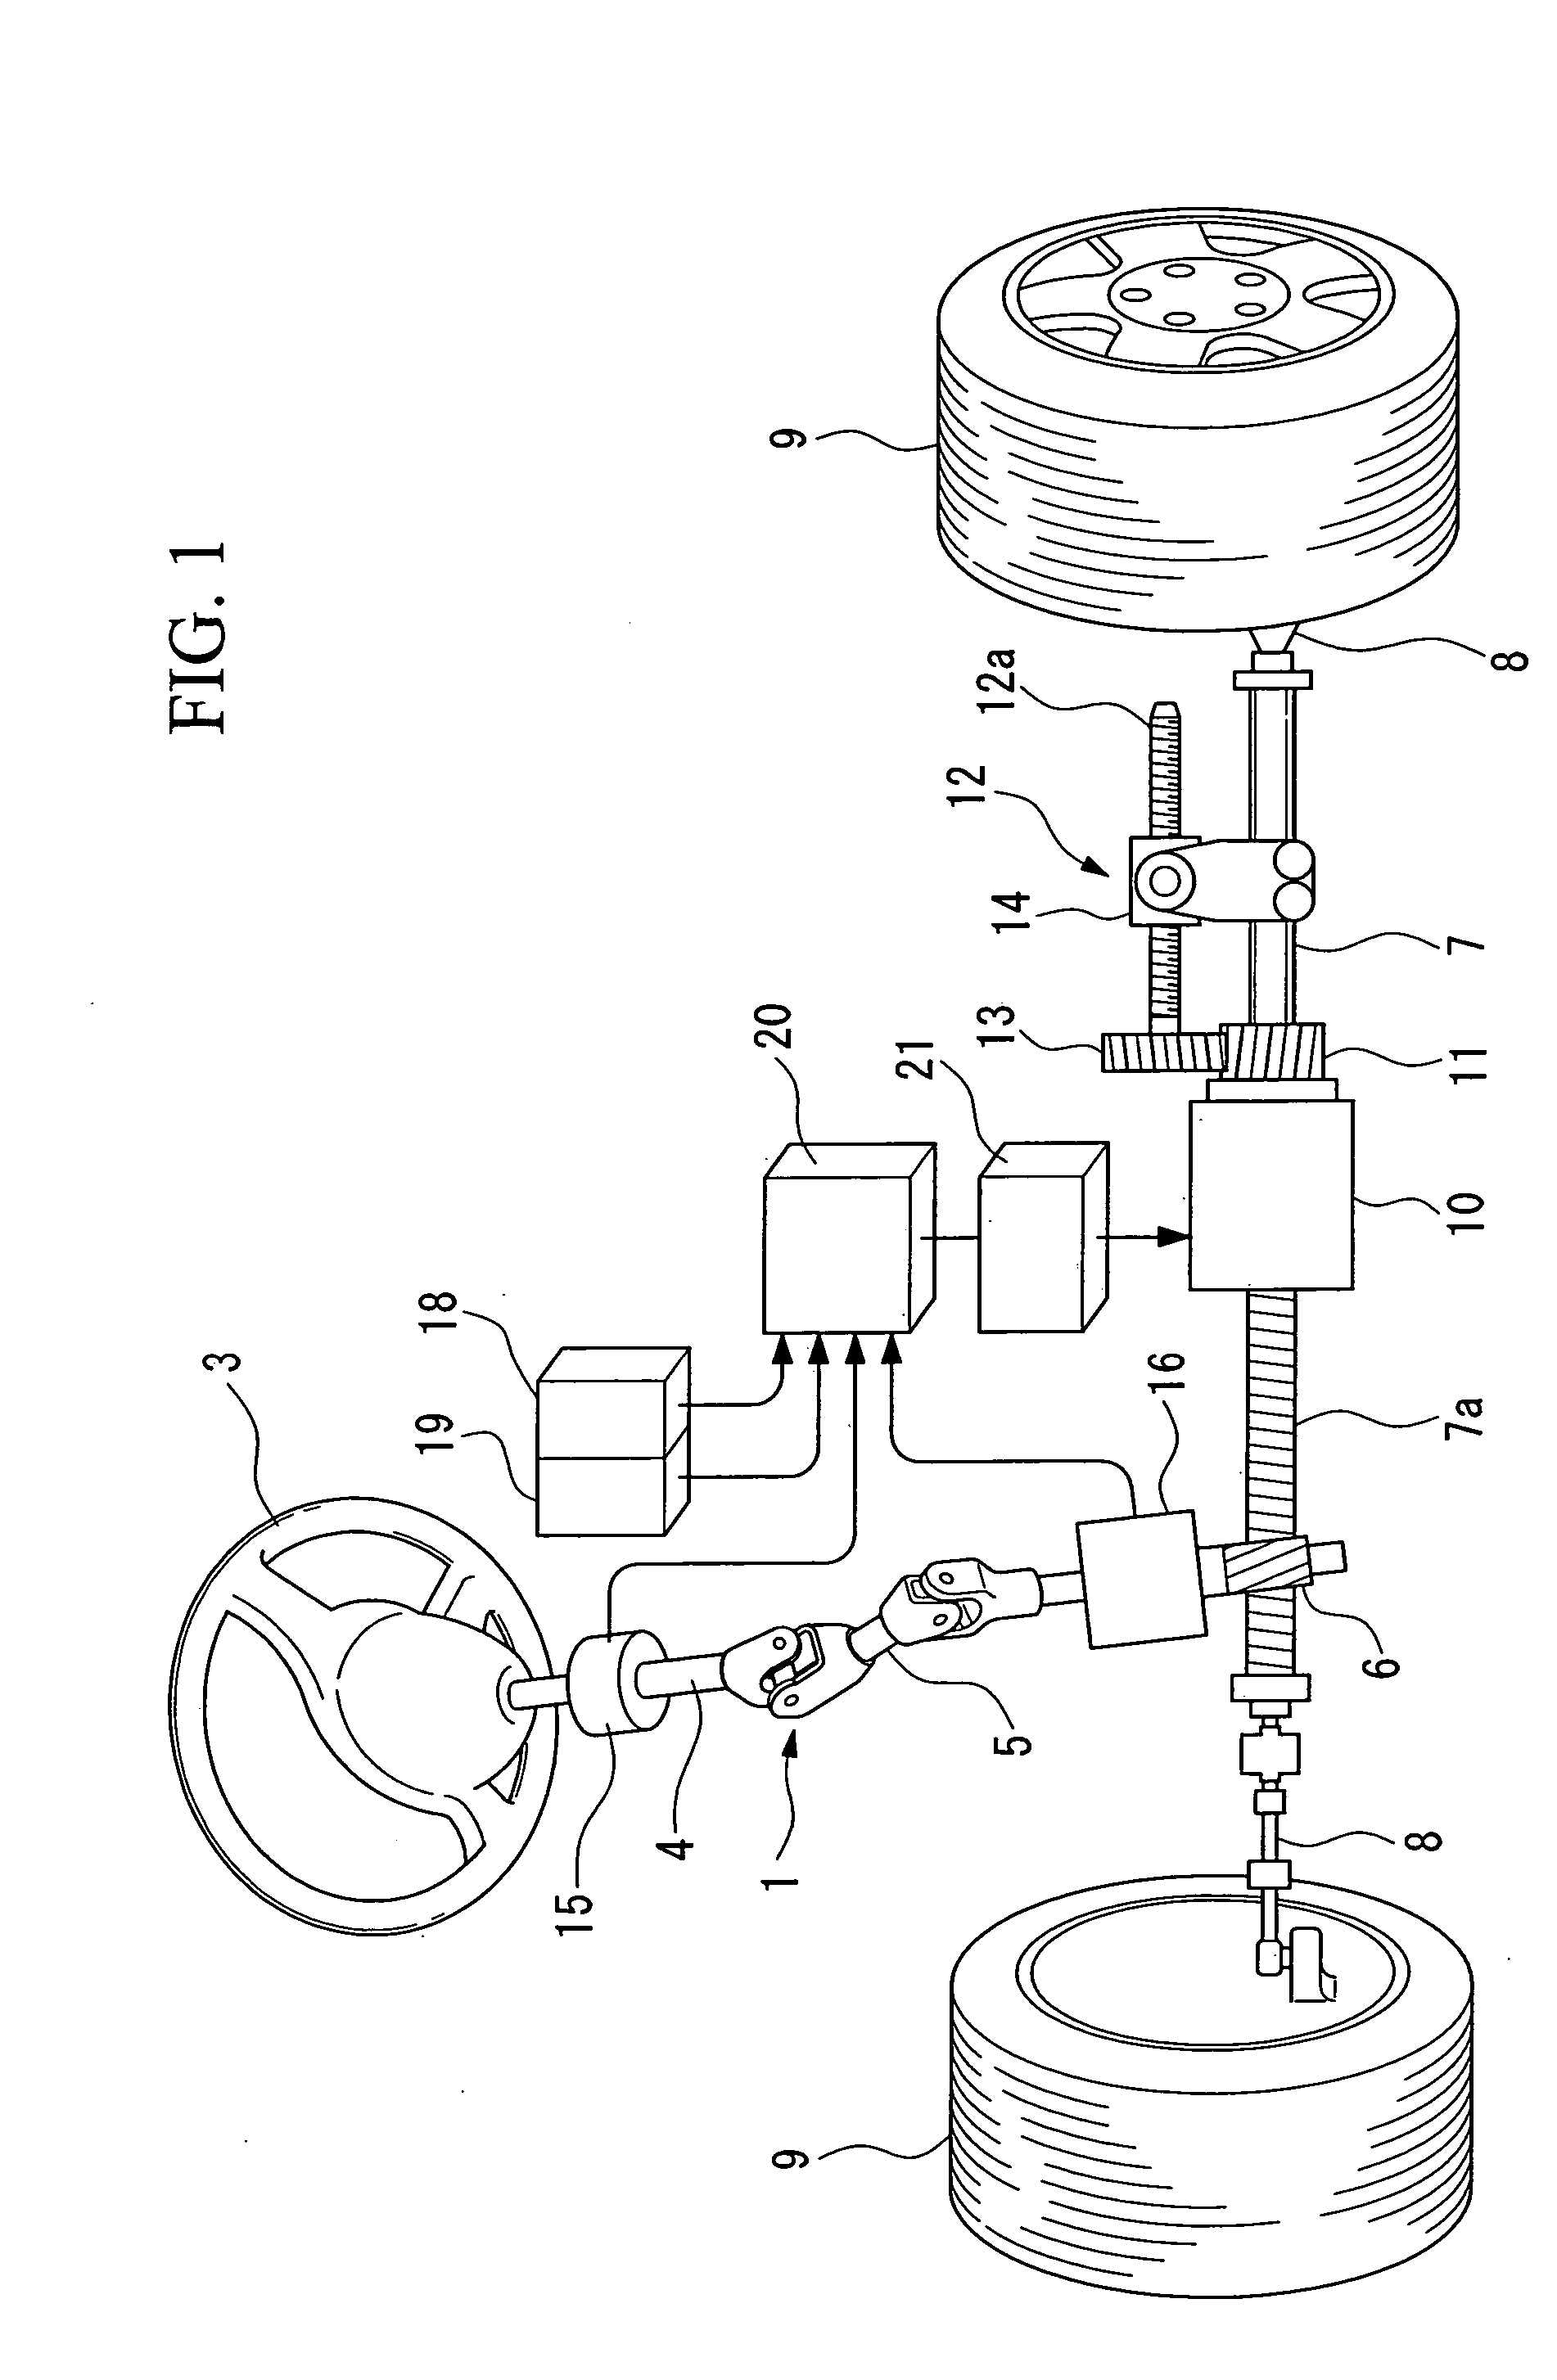 Reaction control system for obtaining preferable steering feeling